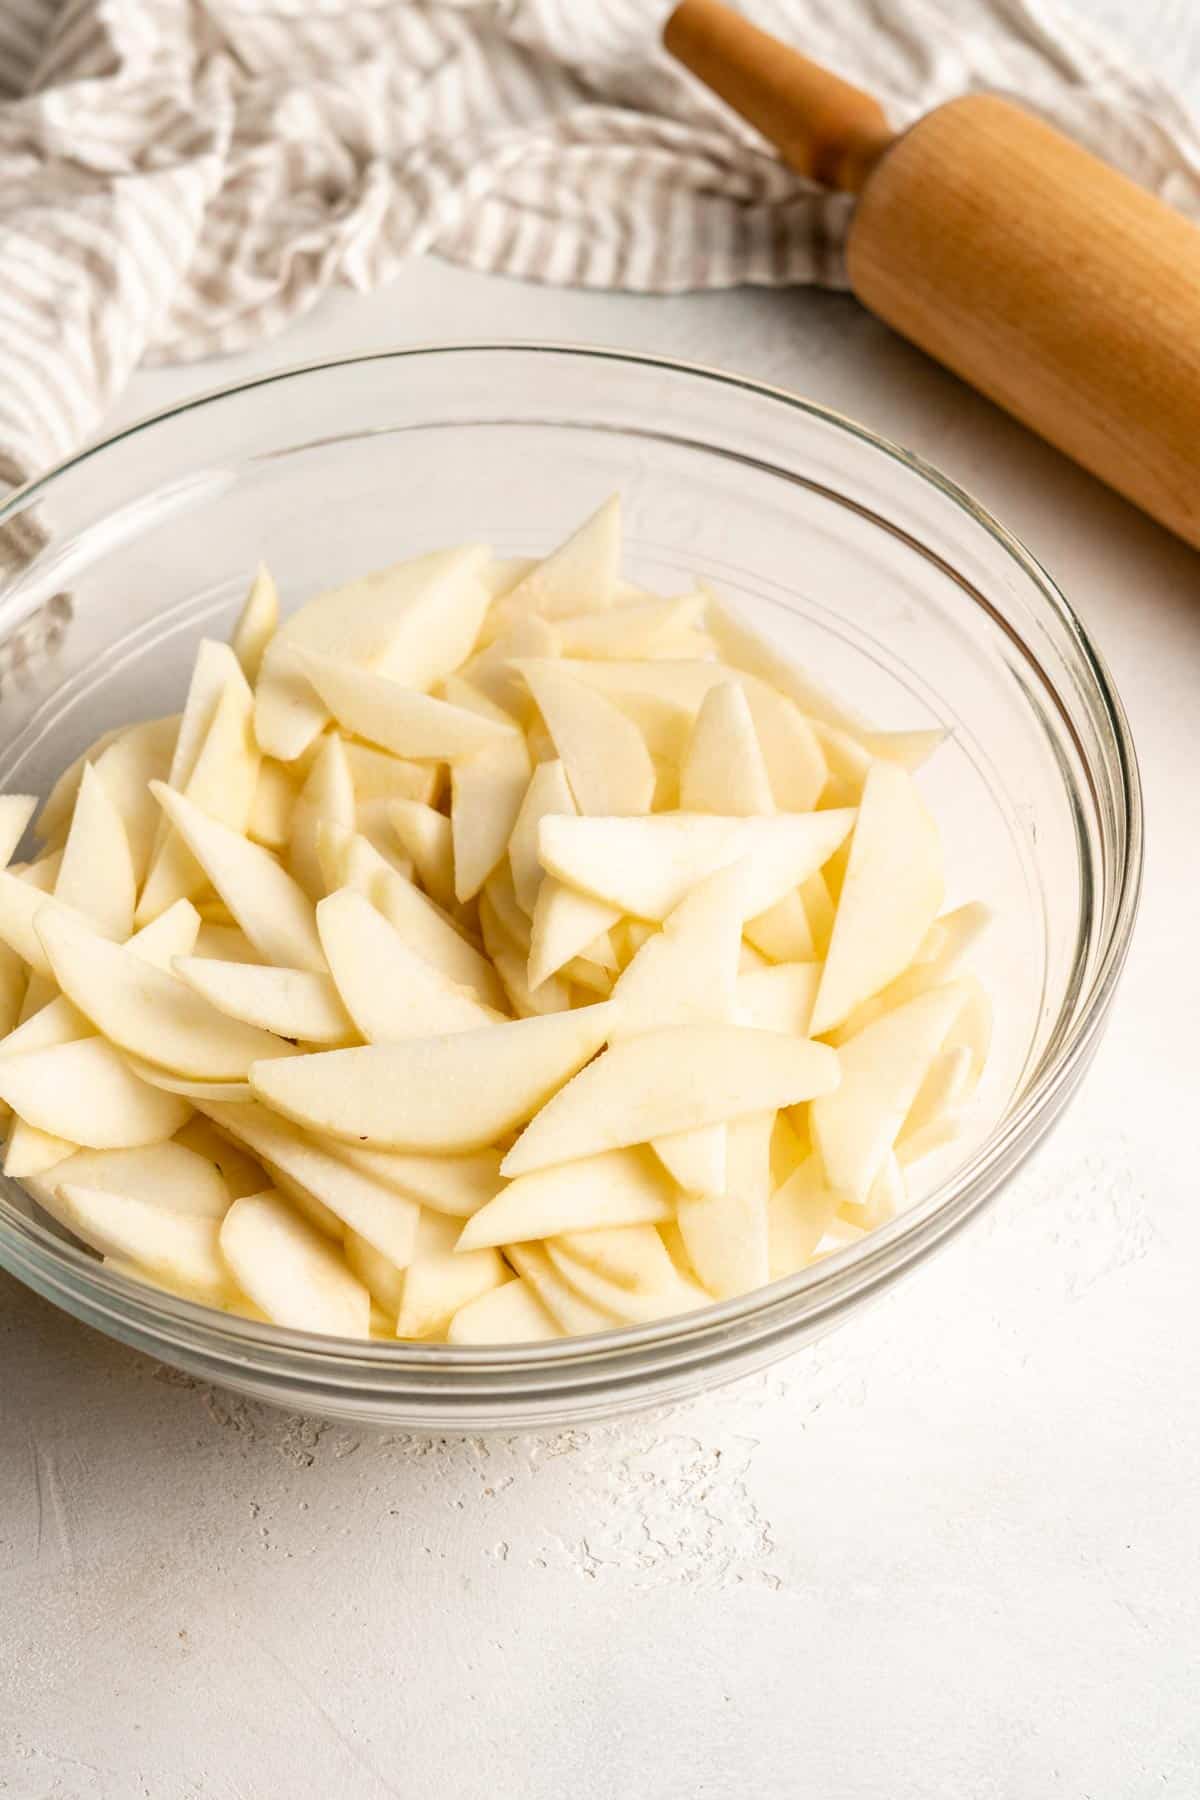 sliced and peeled pears in a glass mixing bowl